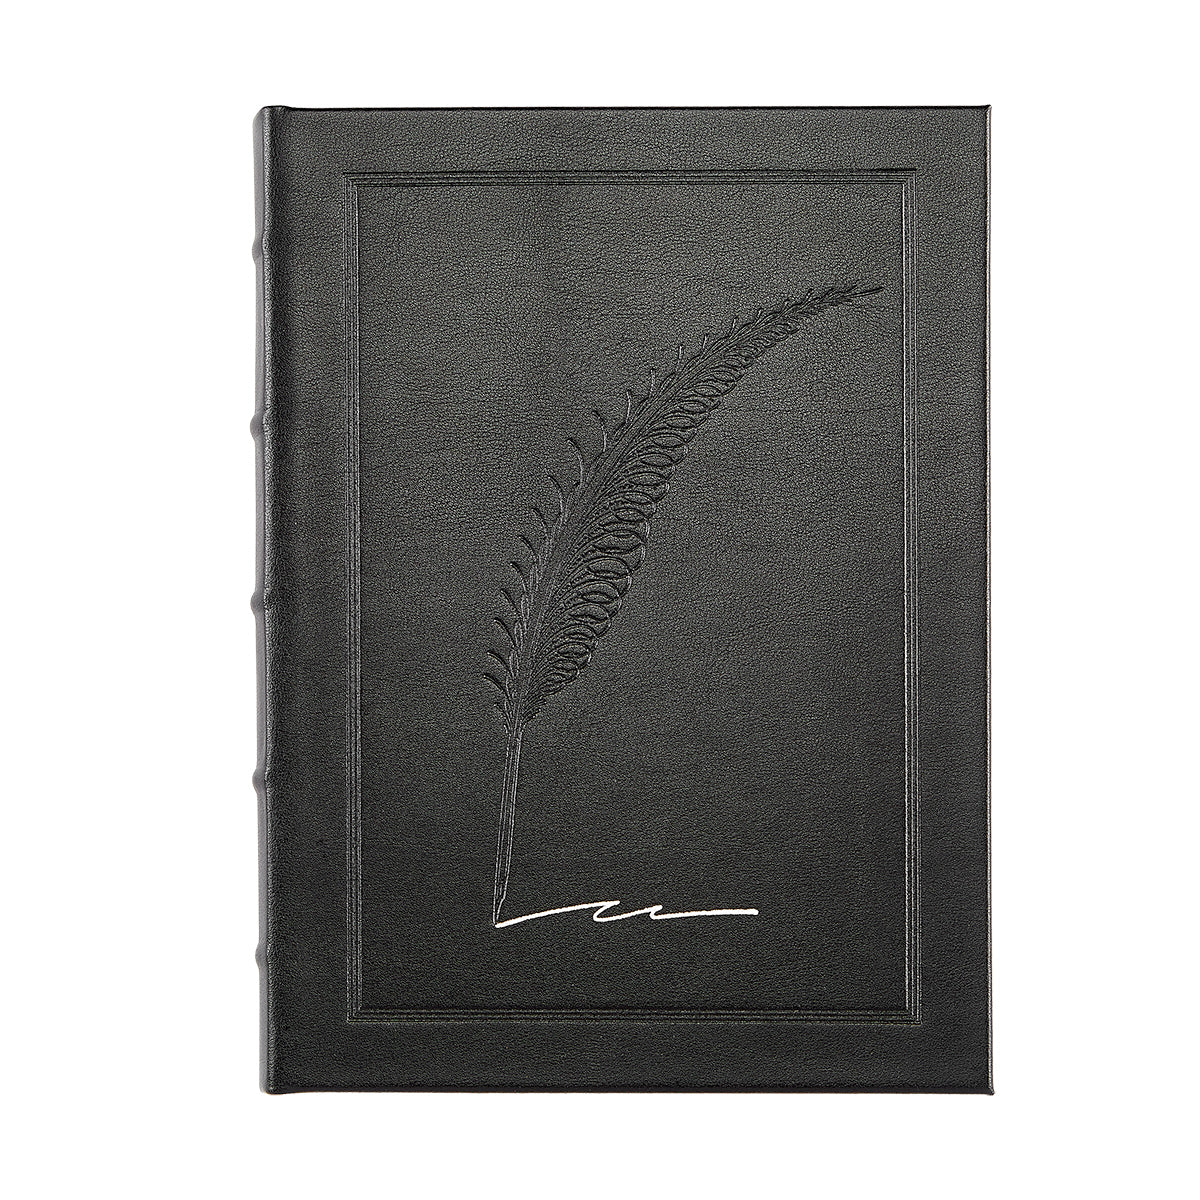 Graphic Image 9" Hardcover Journal Black Bonded Leather